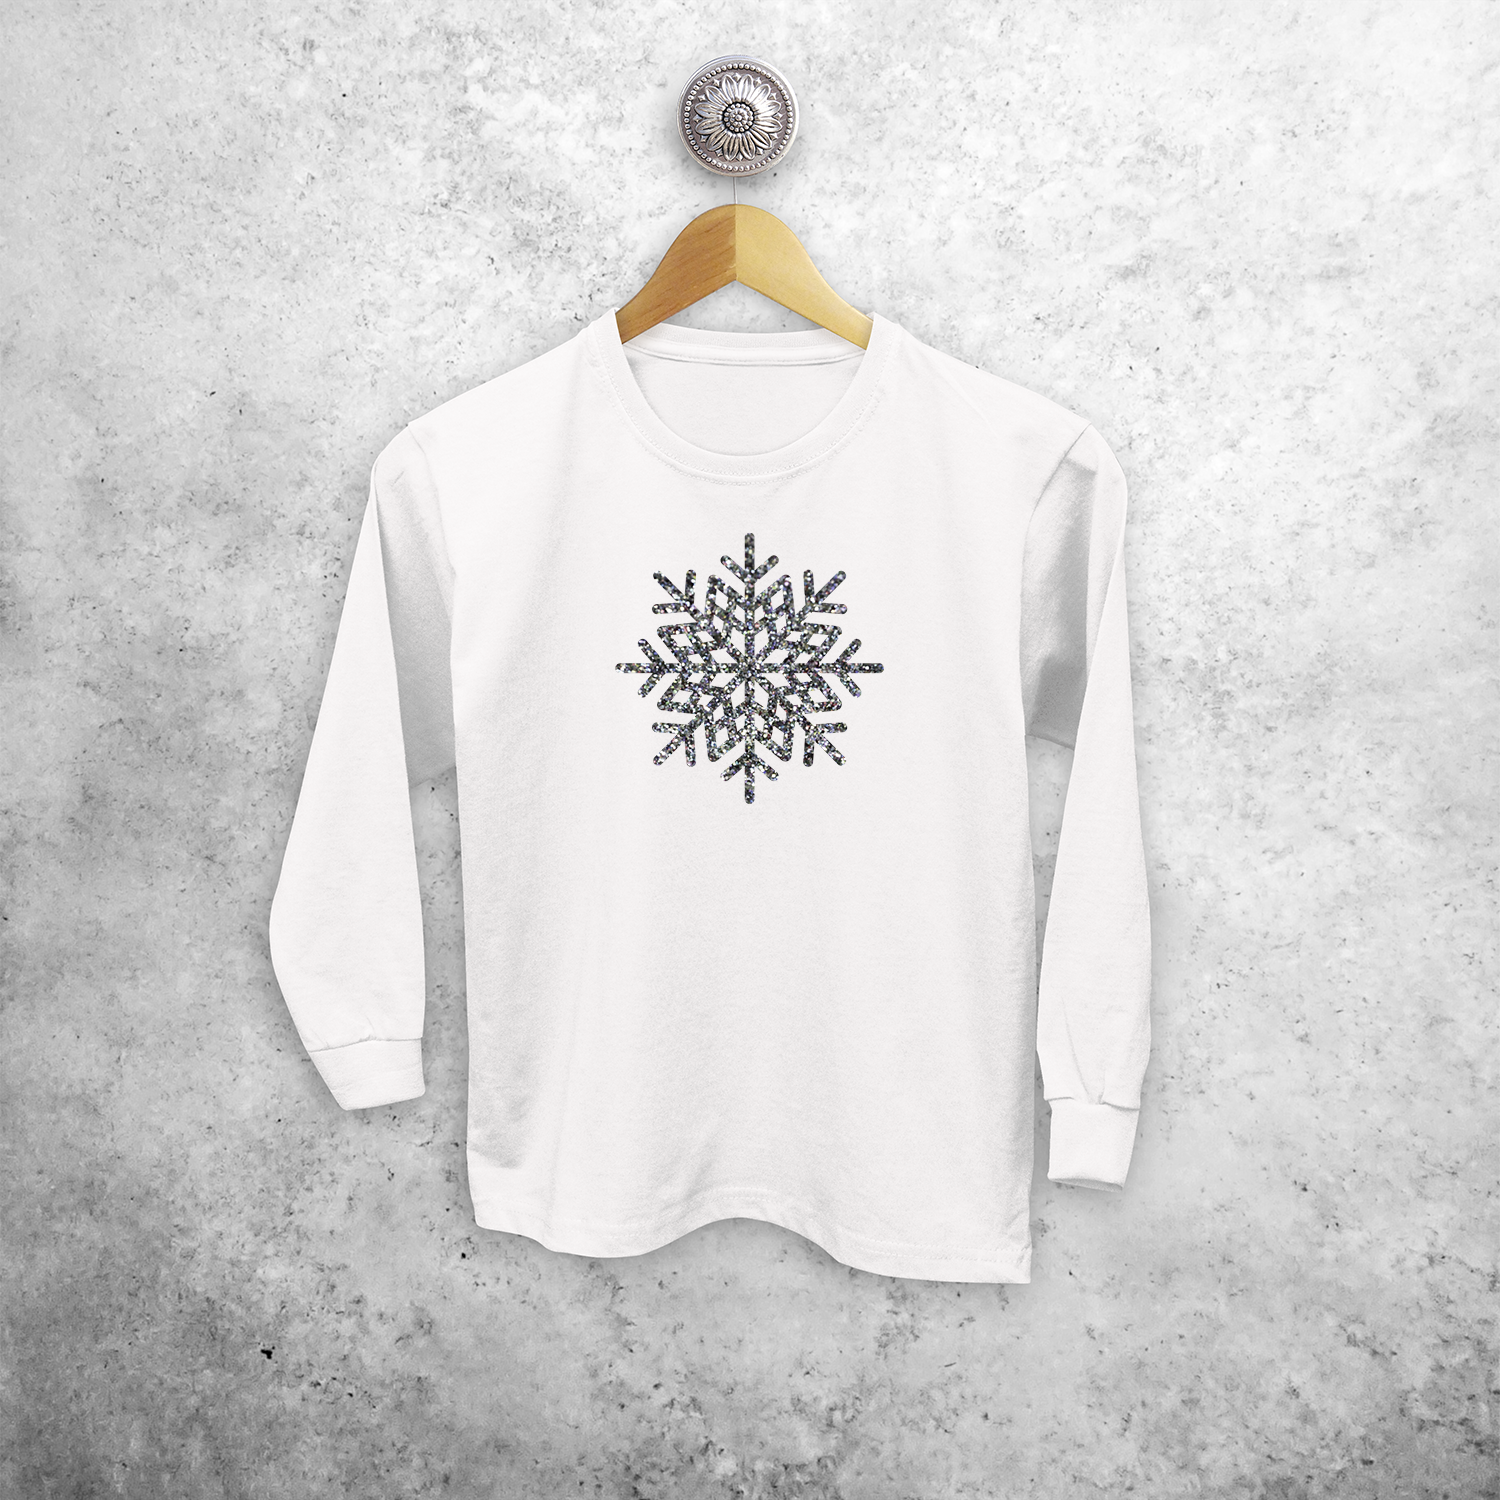 Kids shirt with long sleeves, with glitter snow star print by KMLeon.